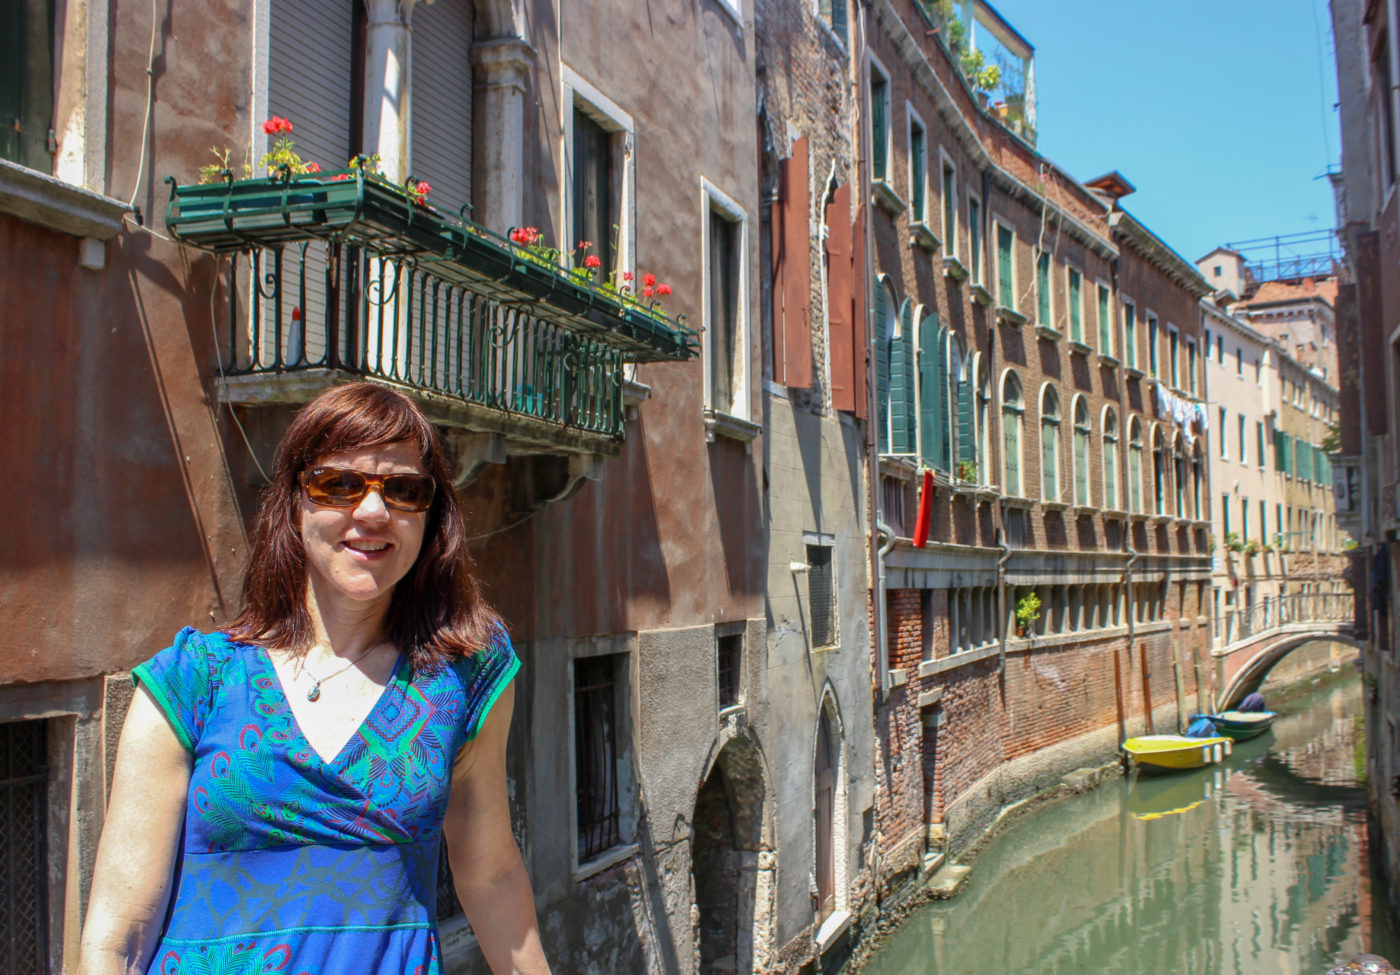 Picturesque Venice, Italy’s Top 15 Things to See